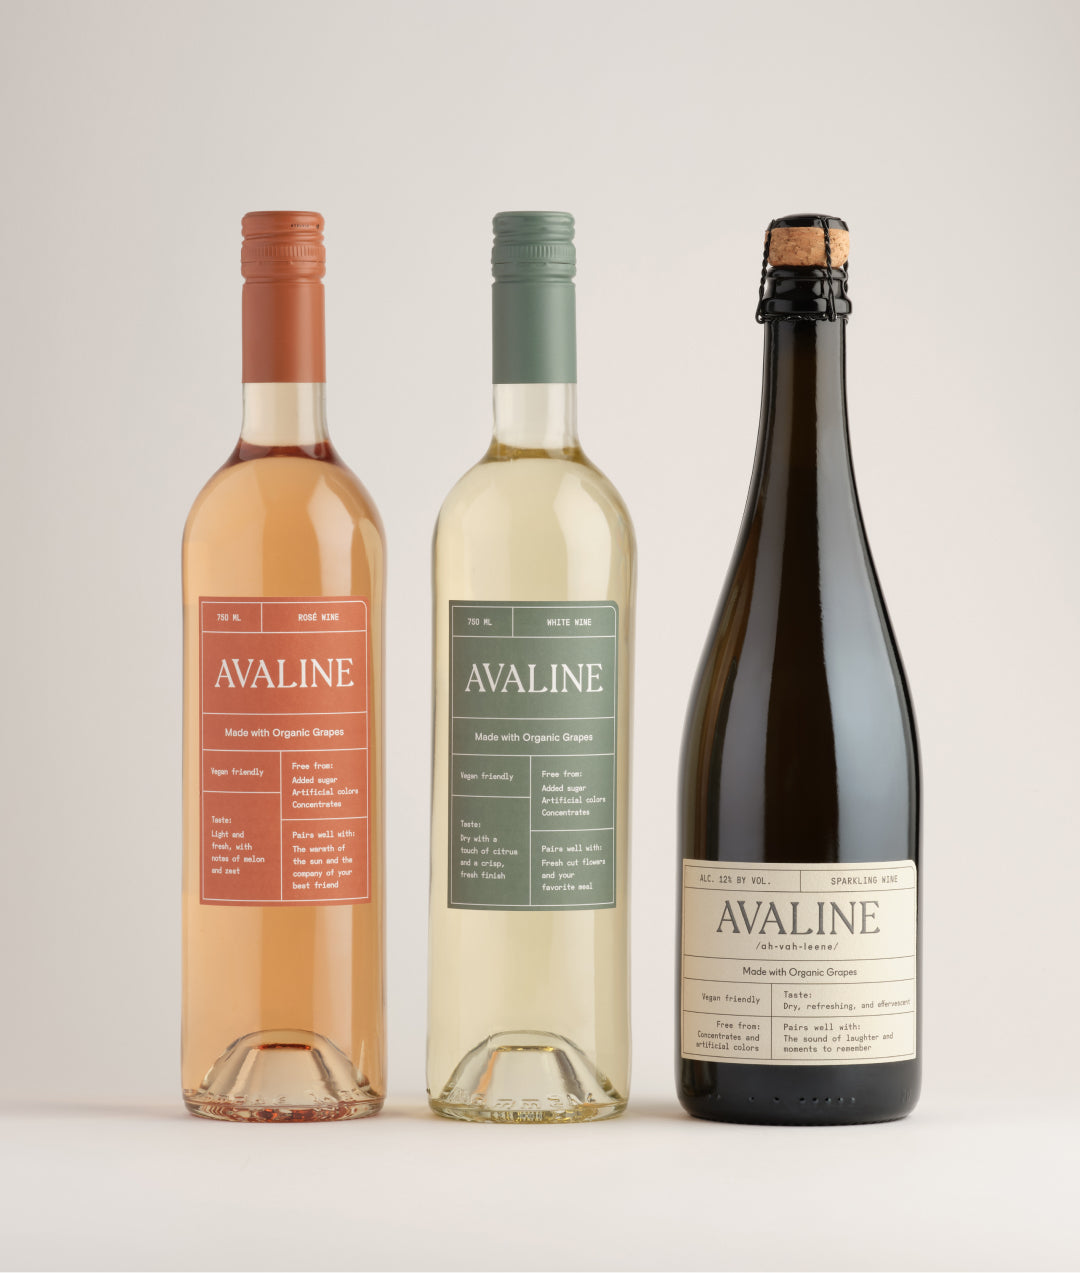 A lineup of wine bottles featuring Avaline White, Rosé, and Sparkling against a white background.